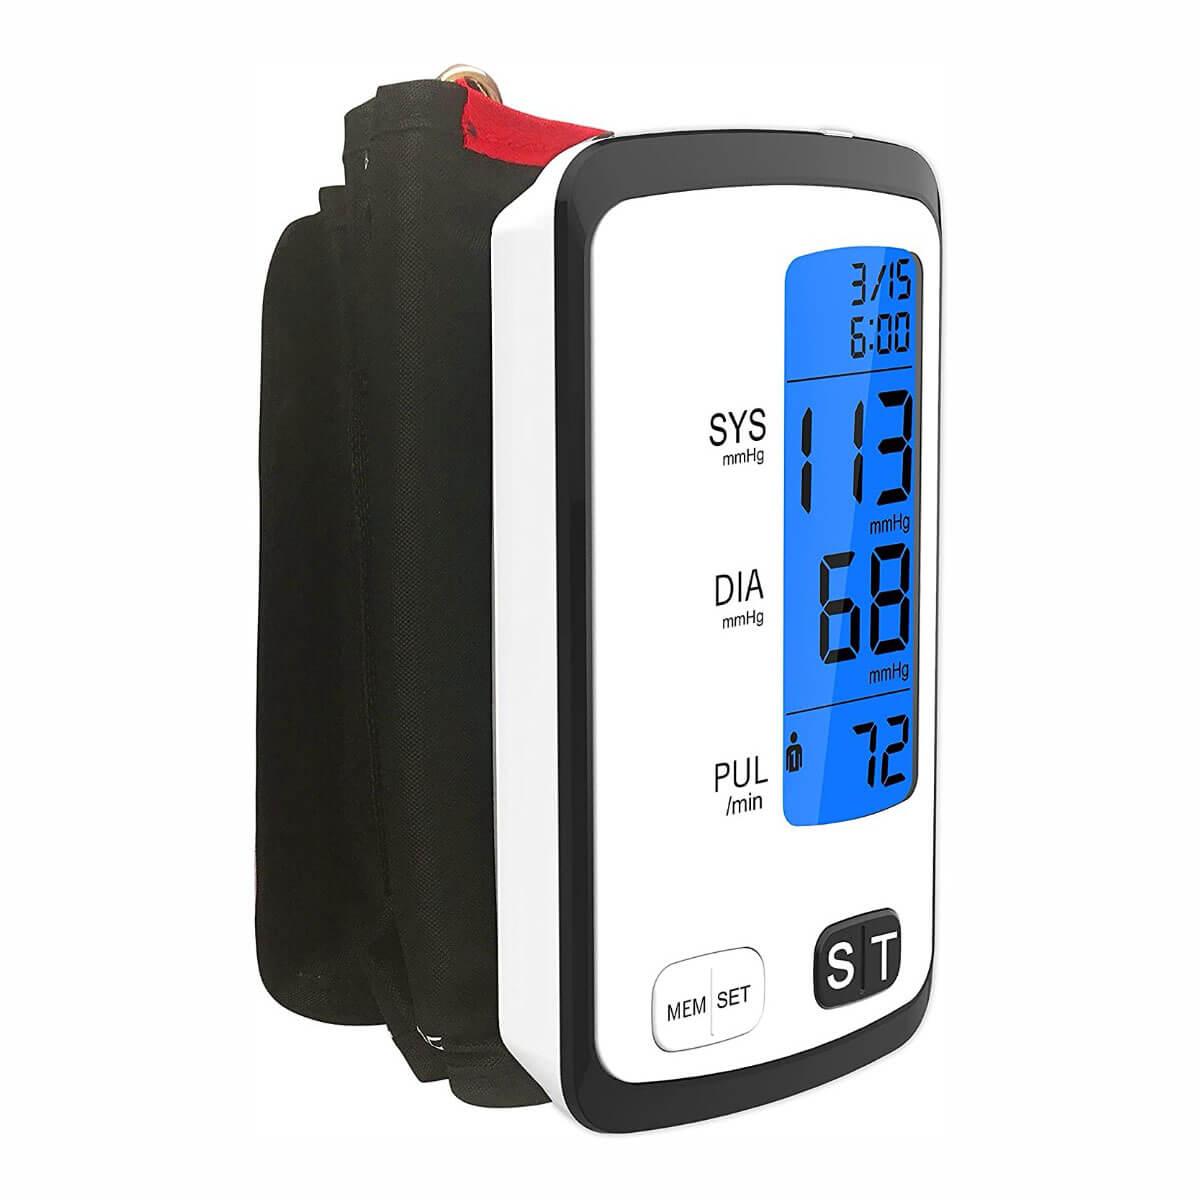 Introduction to the Blood Pressure Monitor